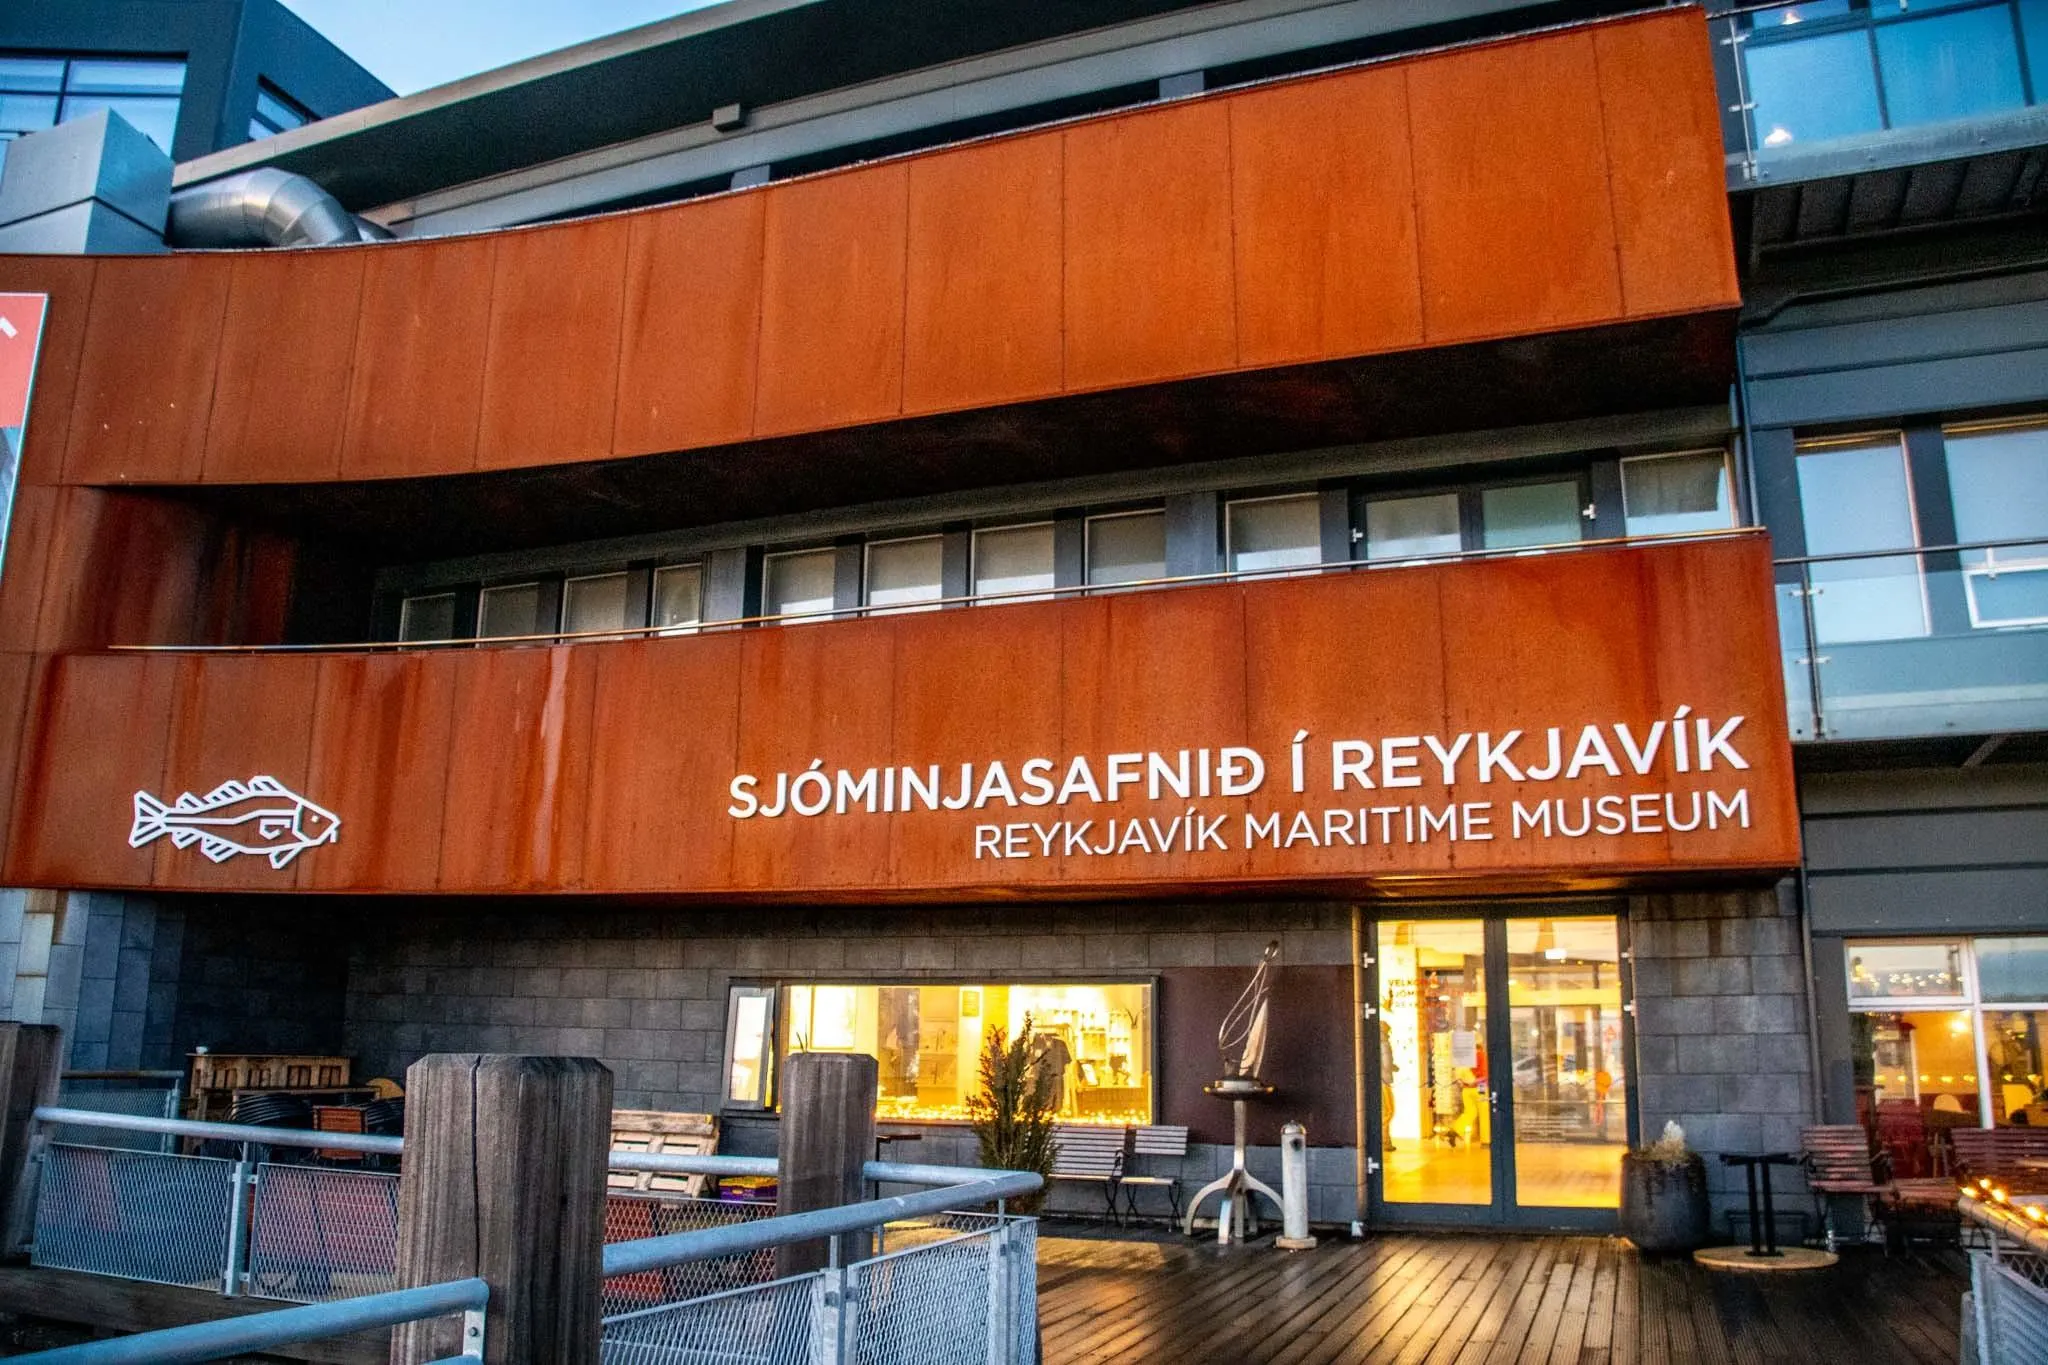 Exterior of a building with a sign for "Reykjavik Maritime Museum."